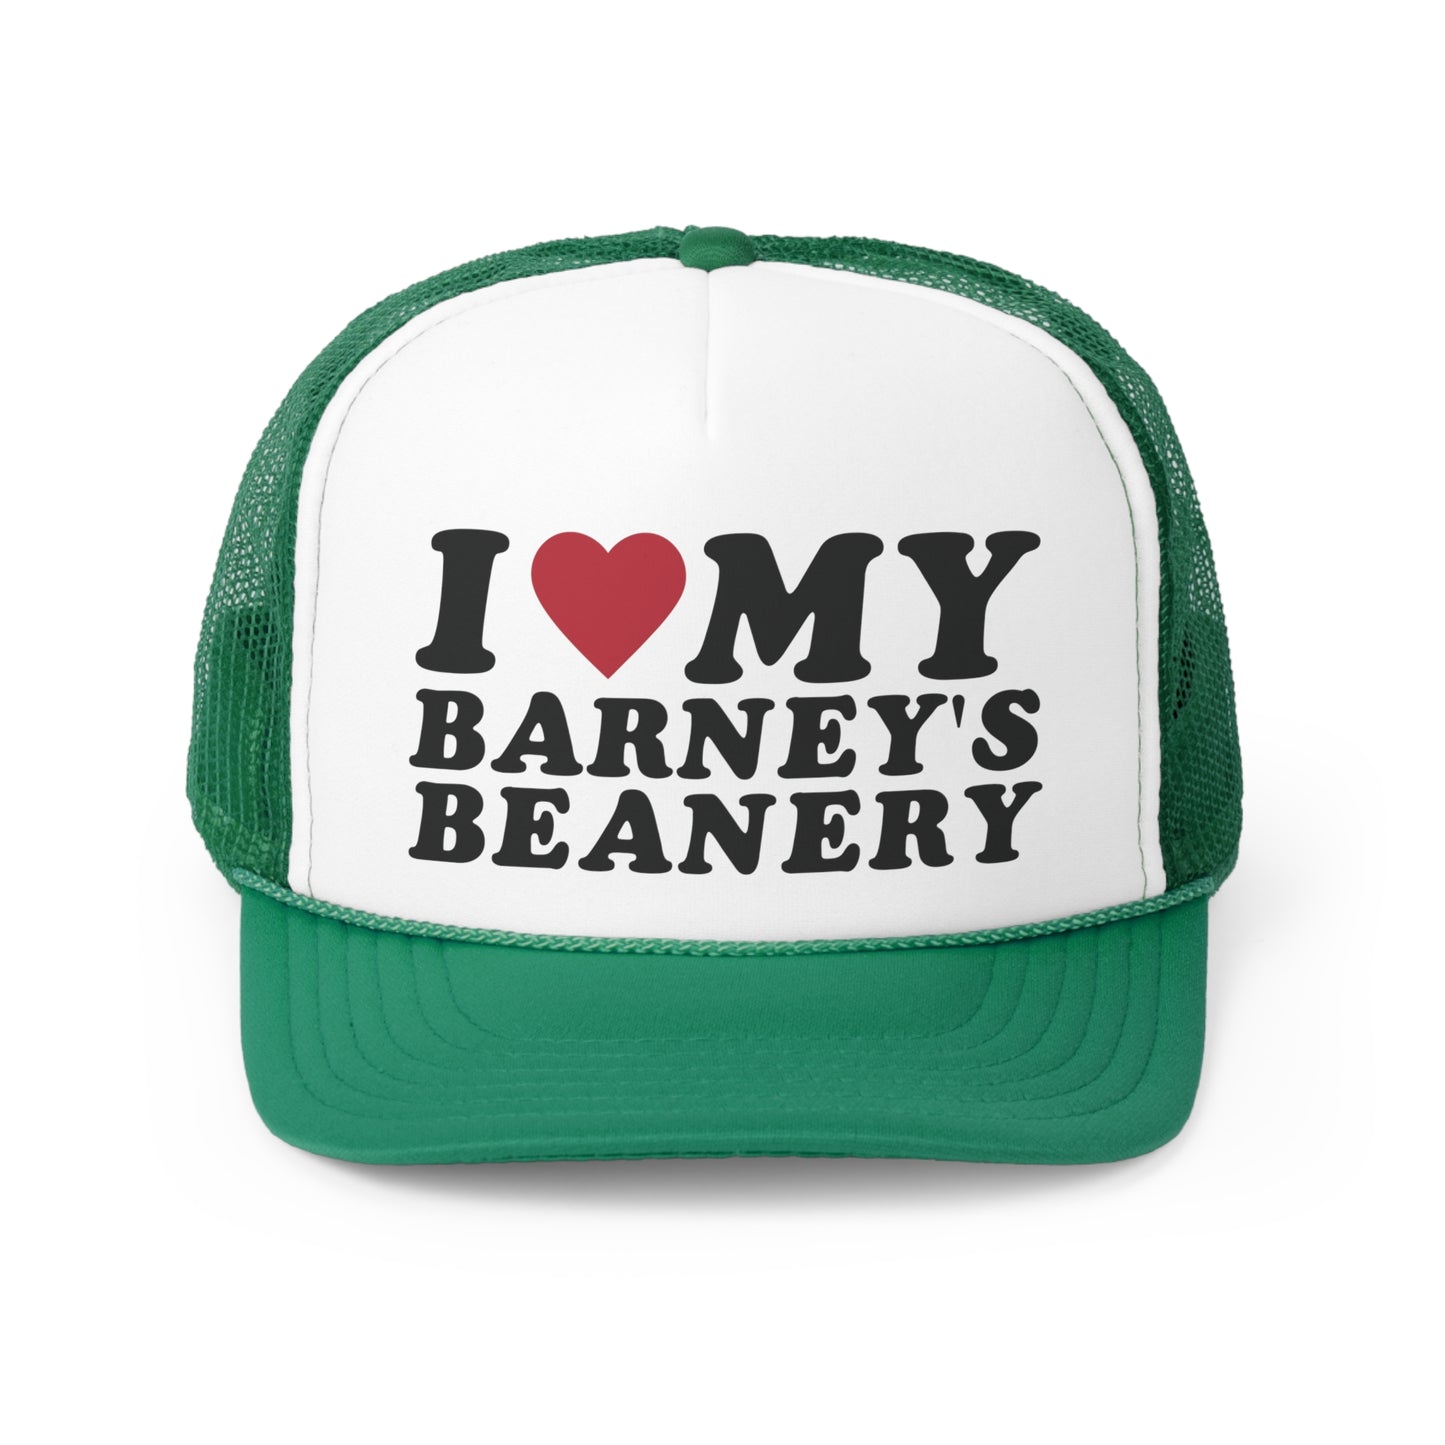 I Heart My | BARNEY'S BEANERY - Trucker Hat | Black And Red Graphic On Green And White Trucker Hat, Front View